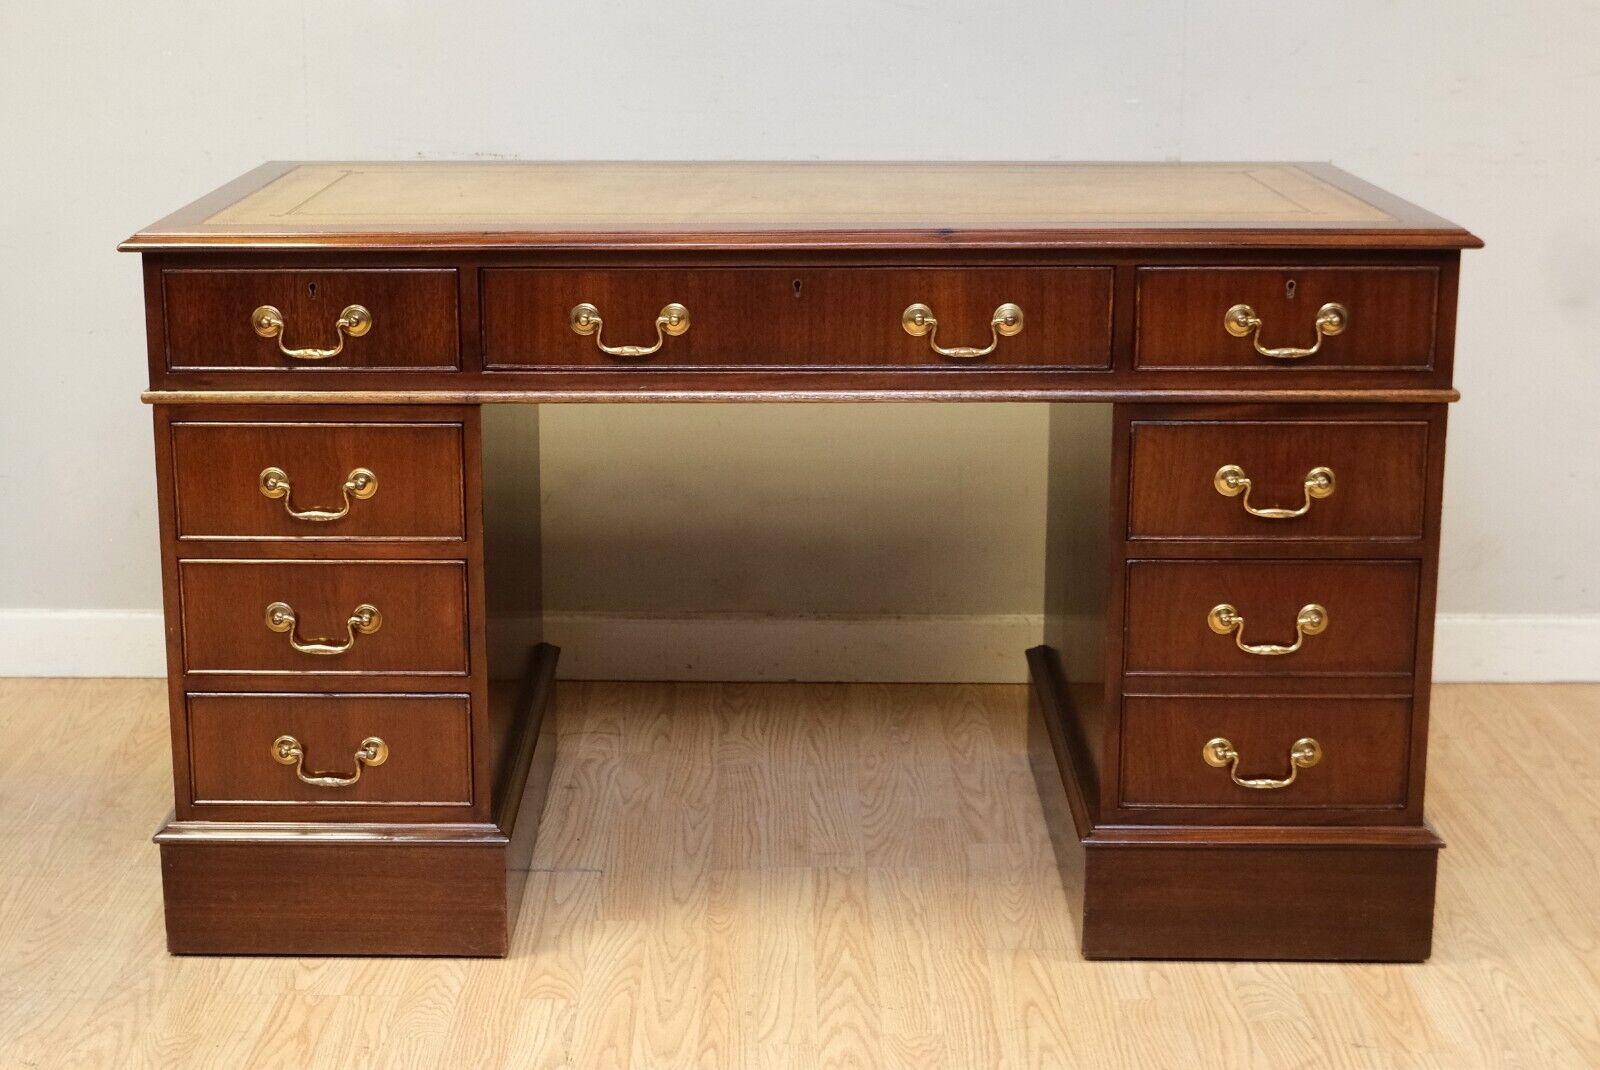 We are delighted to offer for sale this classic Mahogany brown desk with light brown leather top and gold tooling. 

This good looking desk is ideal for your office or for it to be placed at your home as the colour and design will add style. The